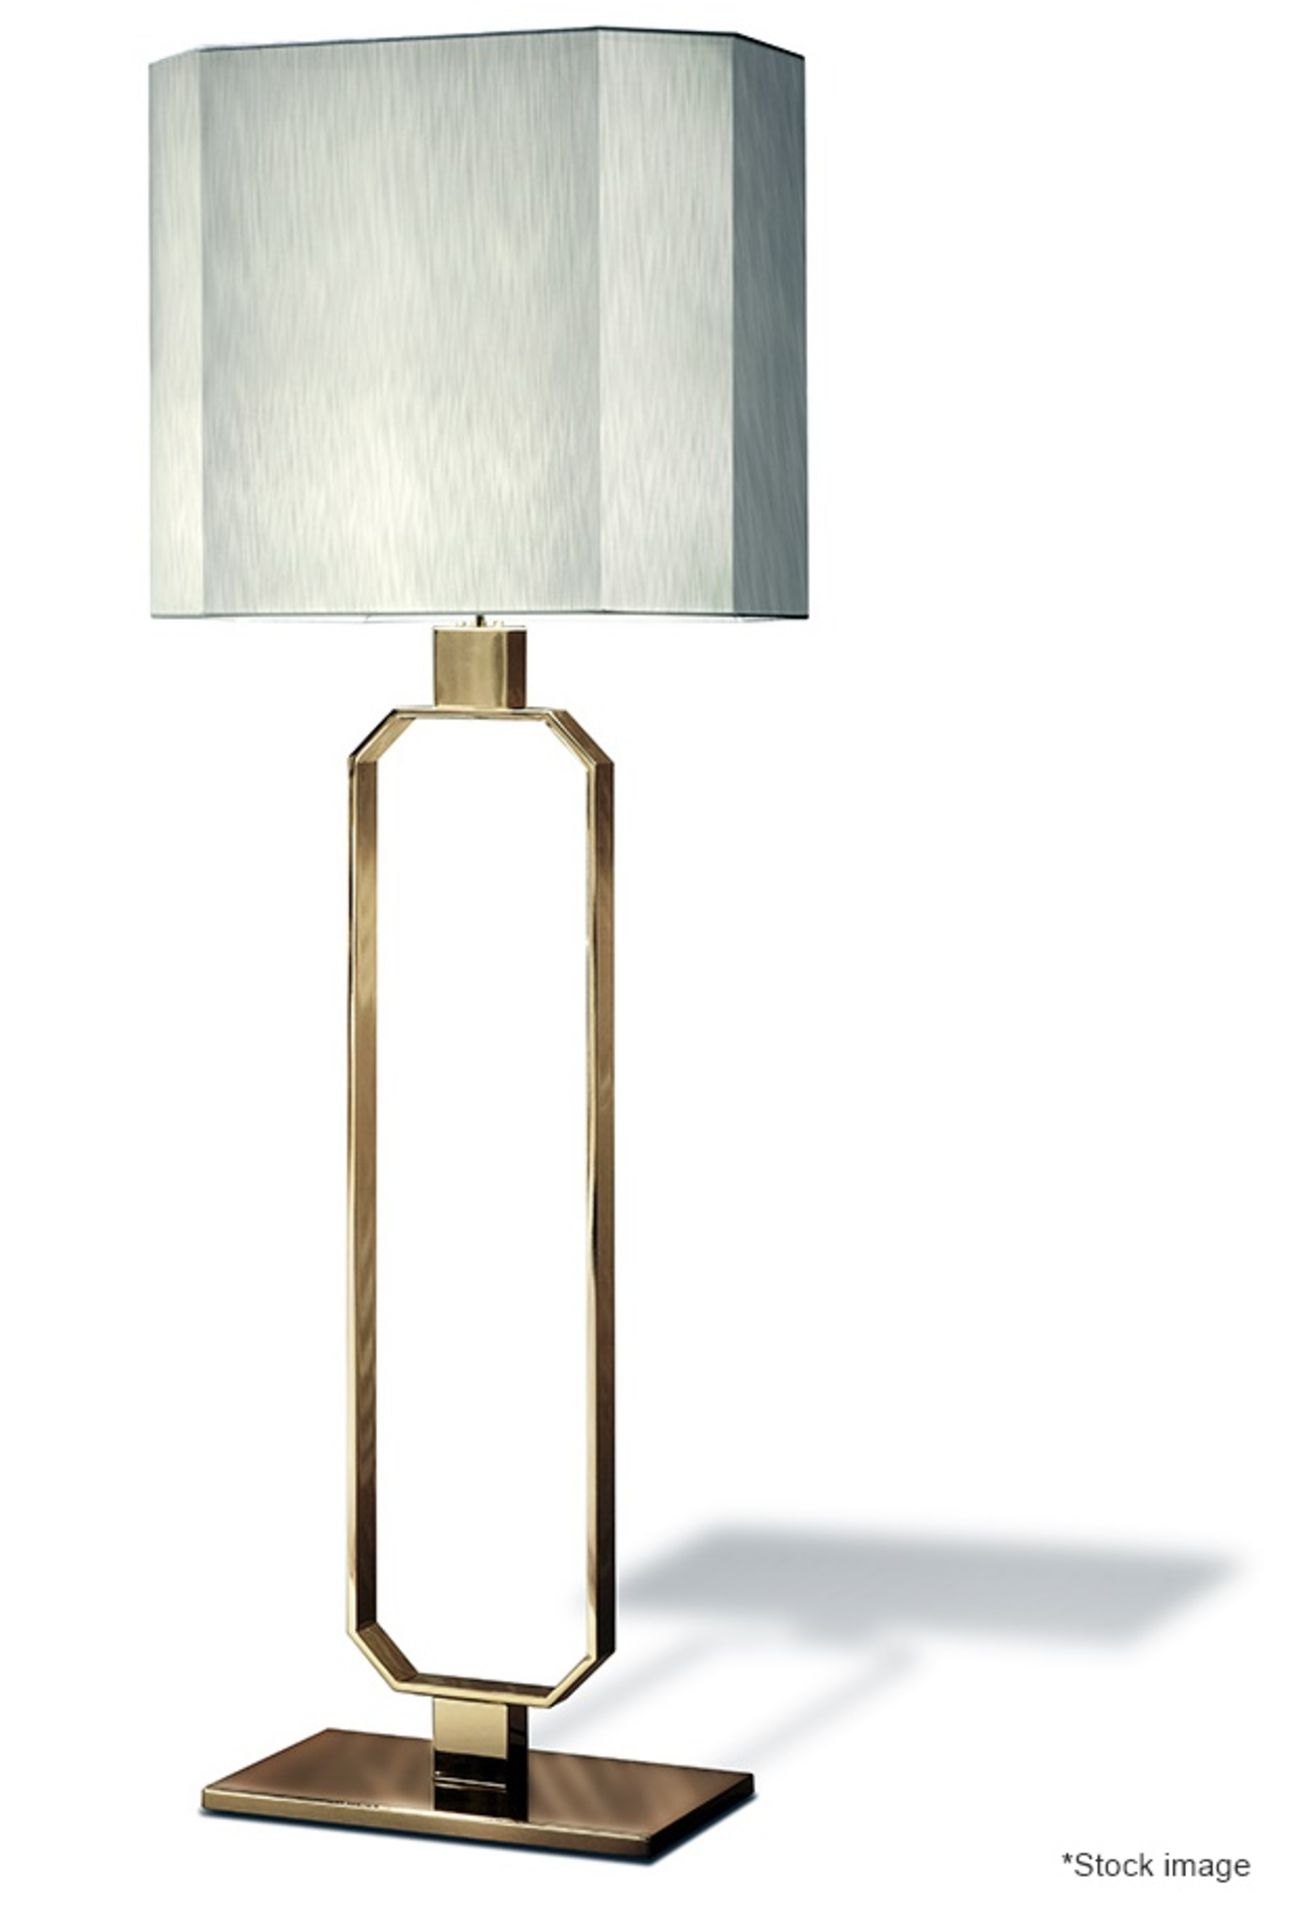 1 x GIORGIO COLLECTION 'Infinity' Freestanding Floor Lamp with Silk Shade - Original Price £6,000 - Image 2 of 15